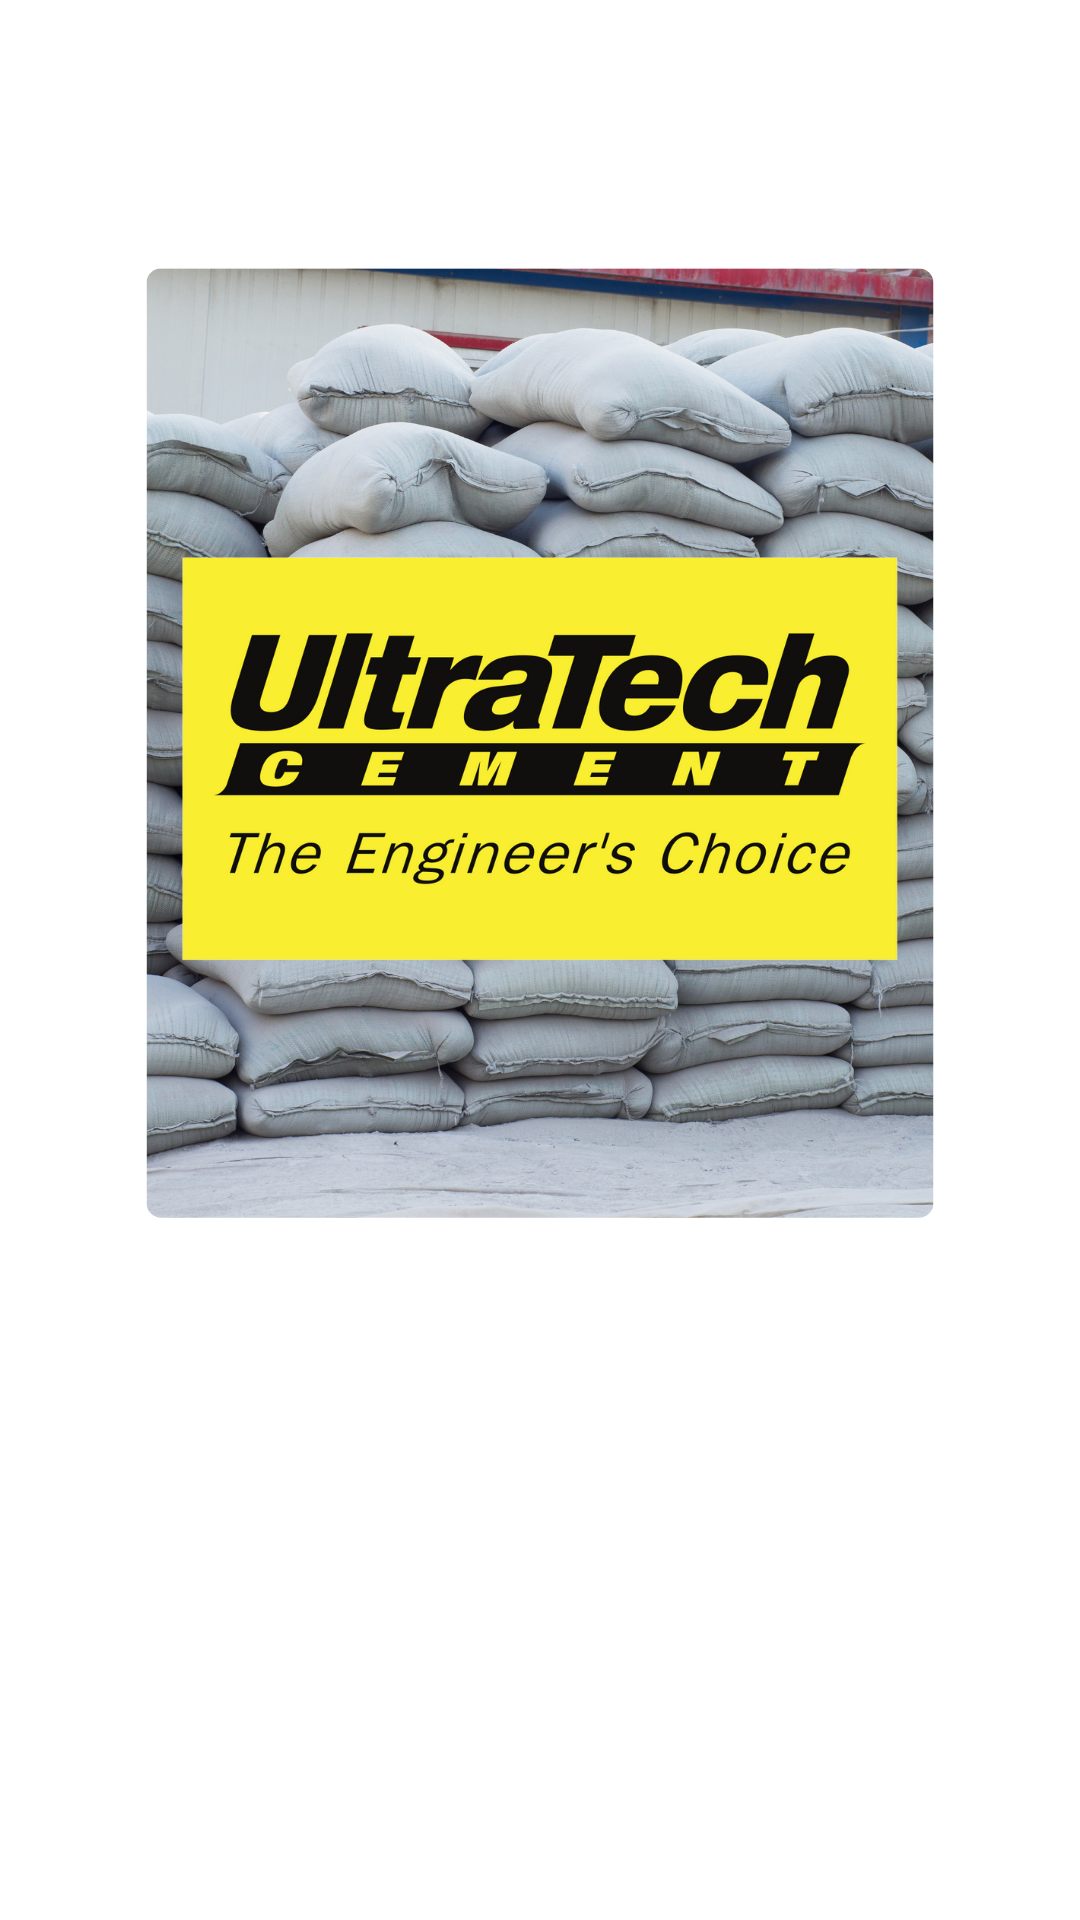 Stocks To Buy Now 💥Ultratech Cement Share News - YouTube